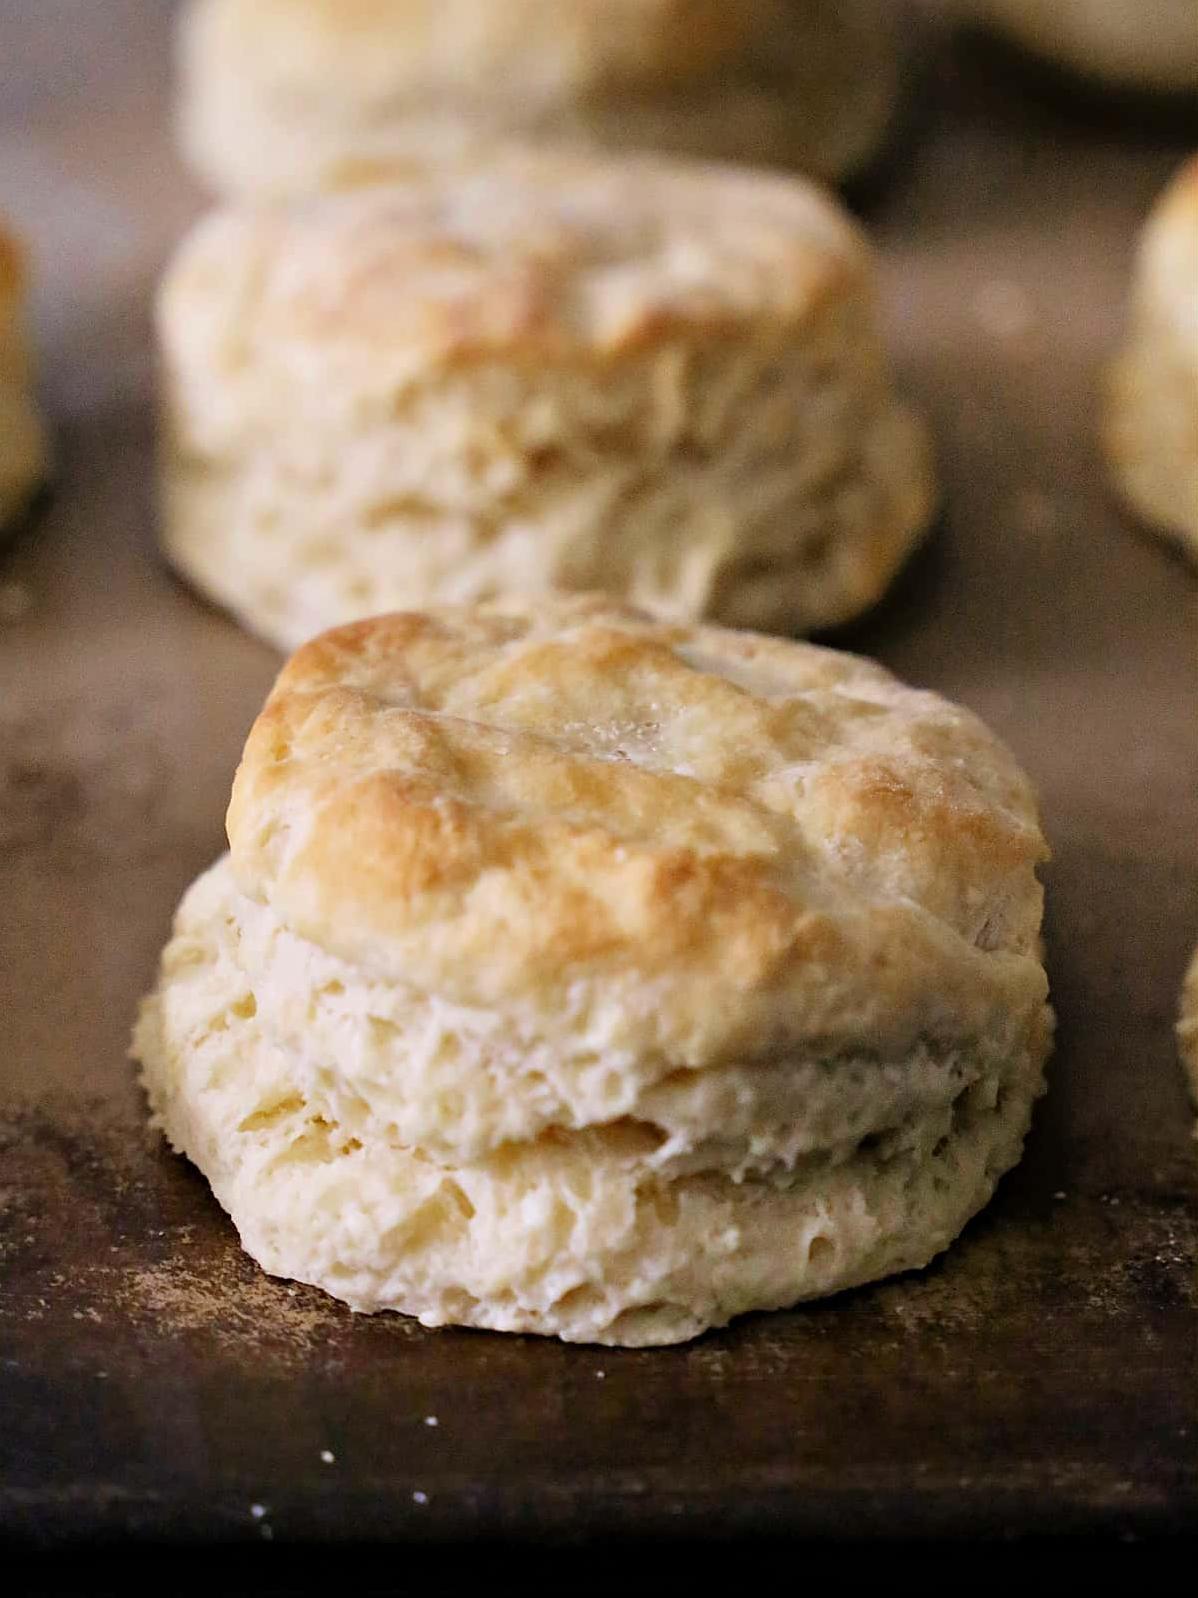  These southern biscuits are perfect for breakfast or as a side dish for dinner